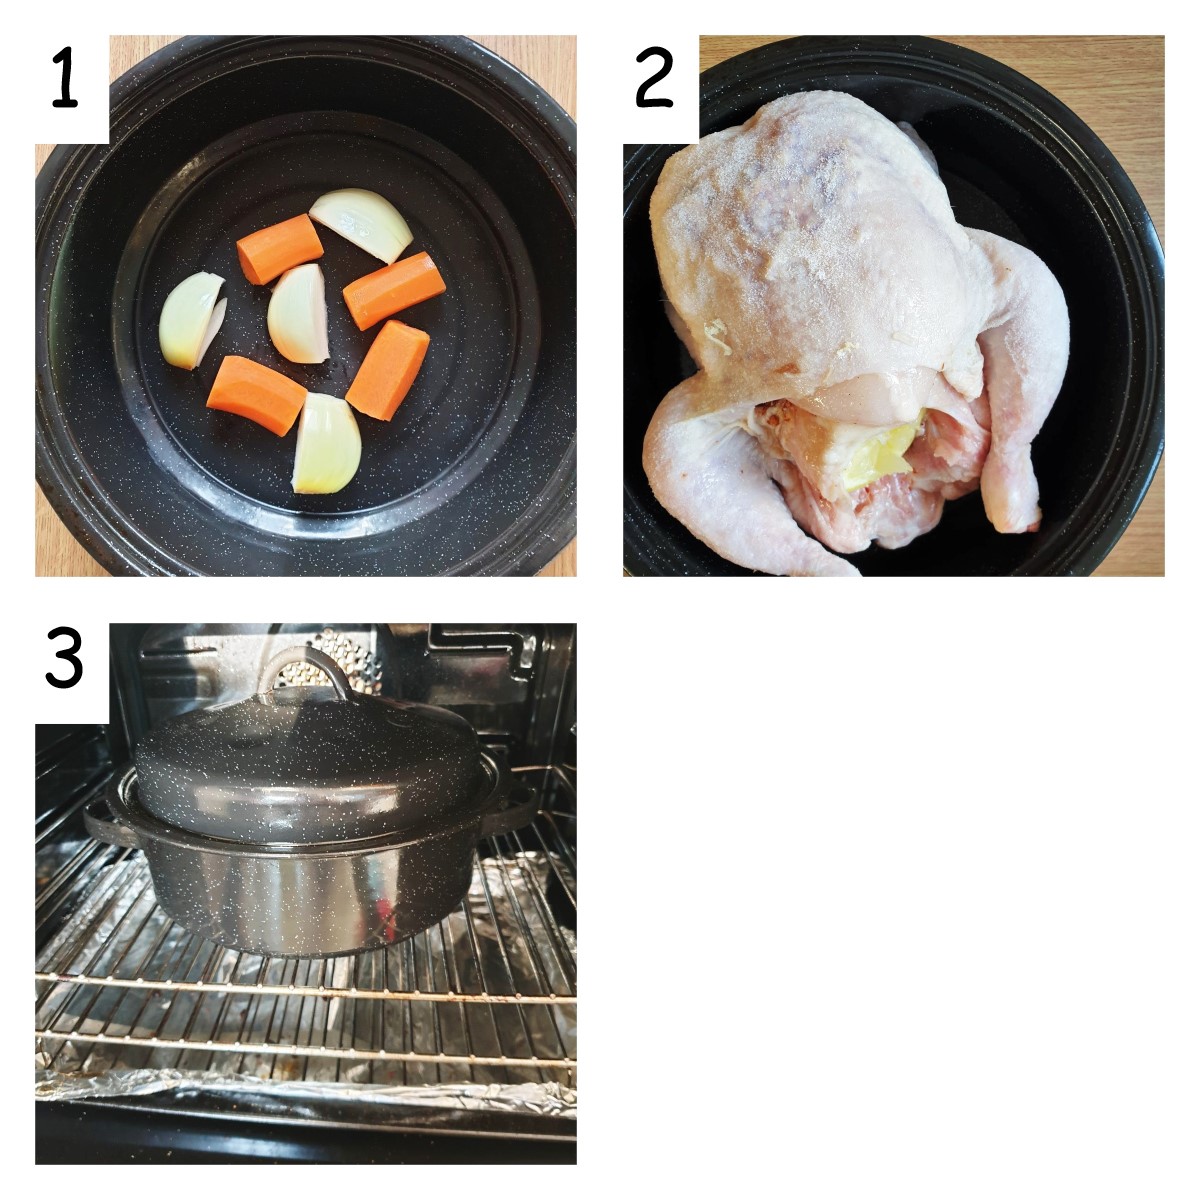 Collage of 3 images showing chicken being placed in a roasting pan and into the oven.